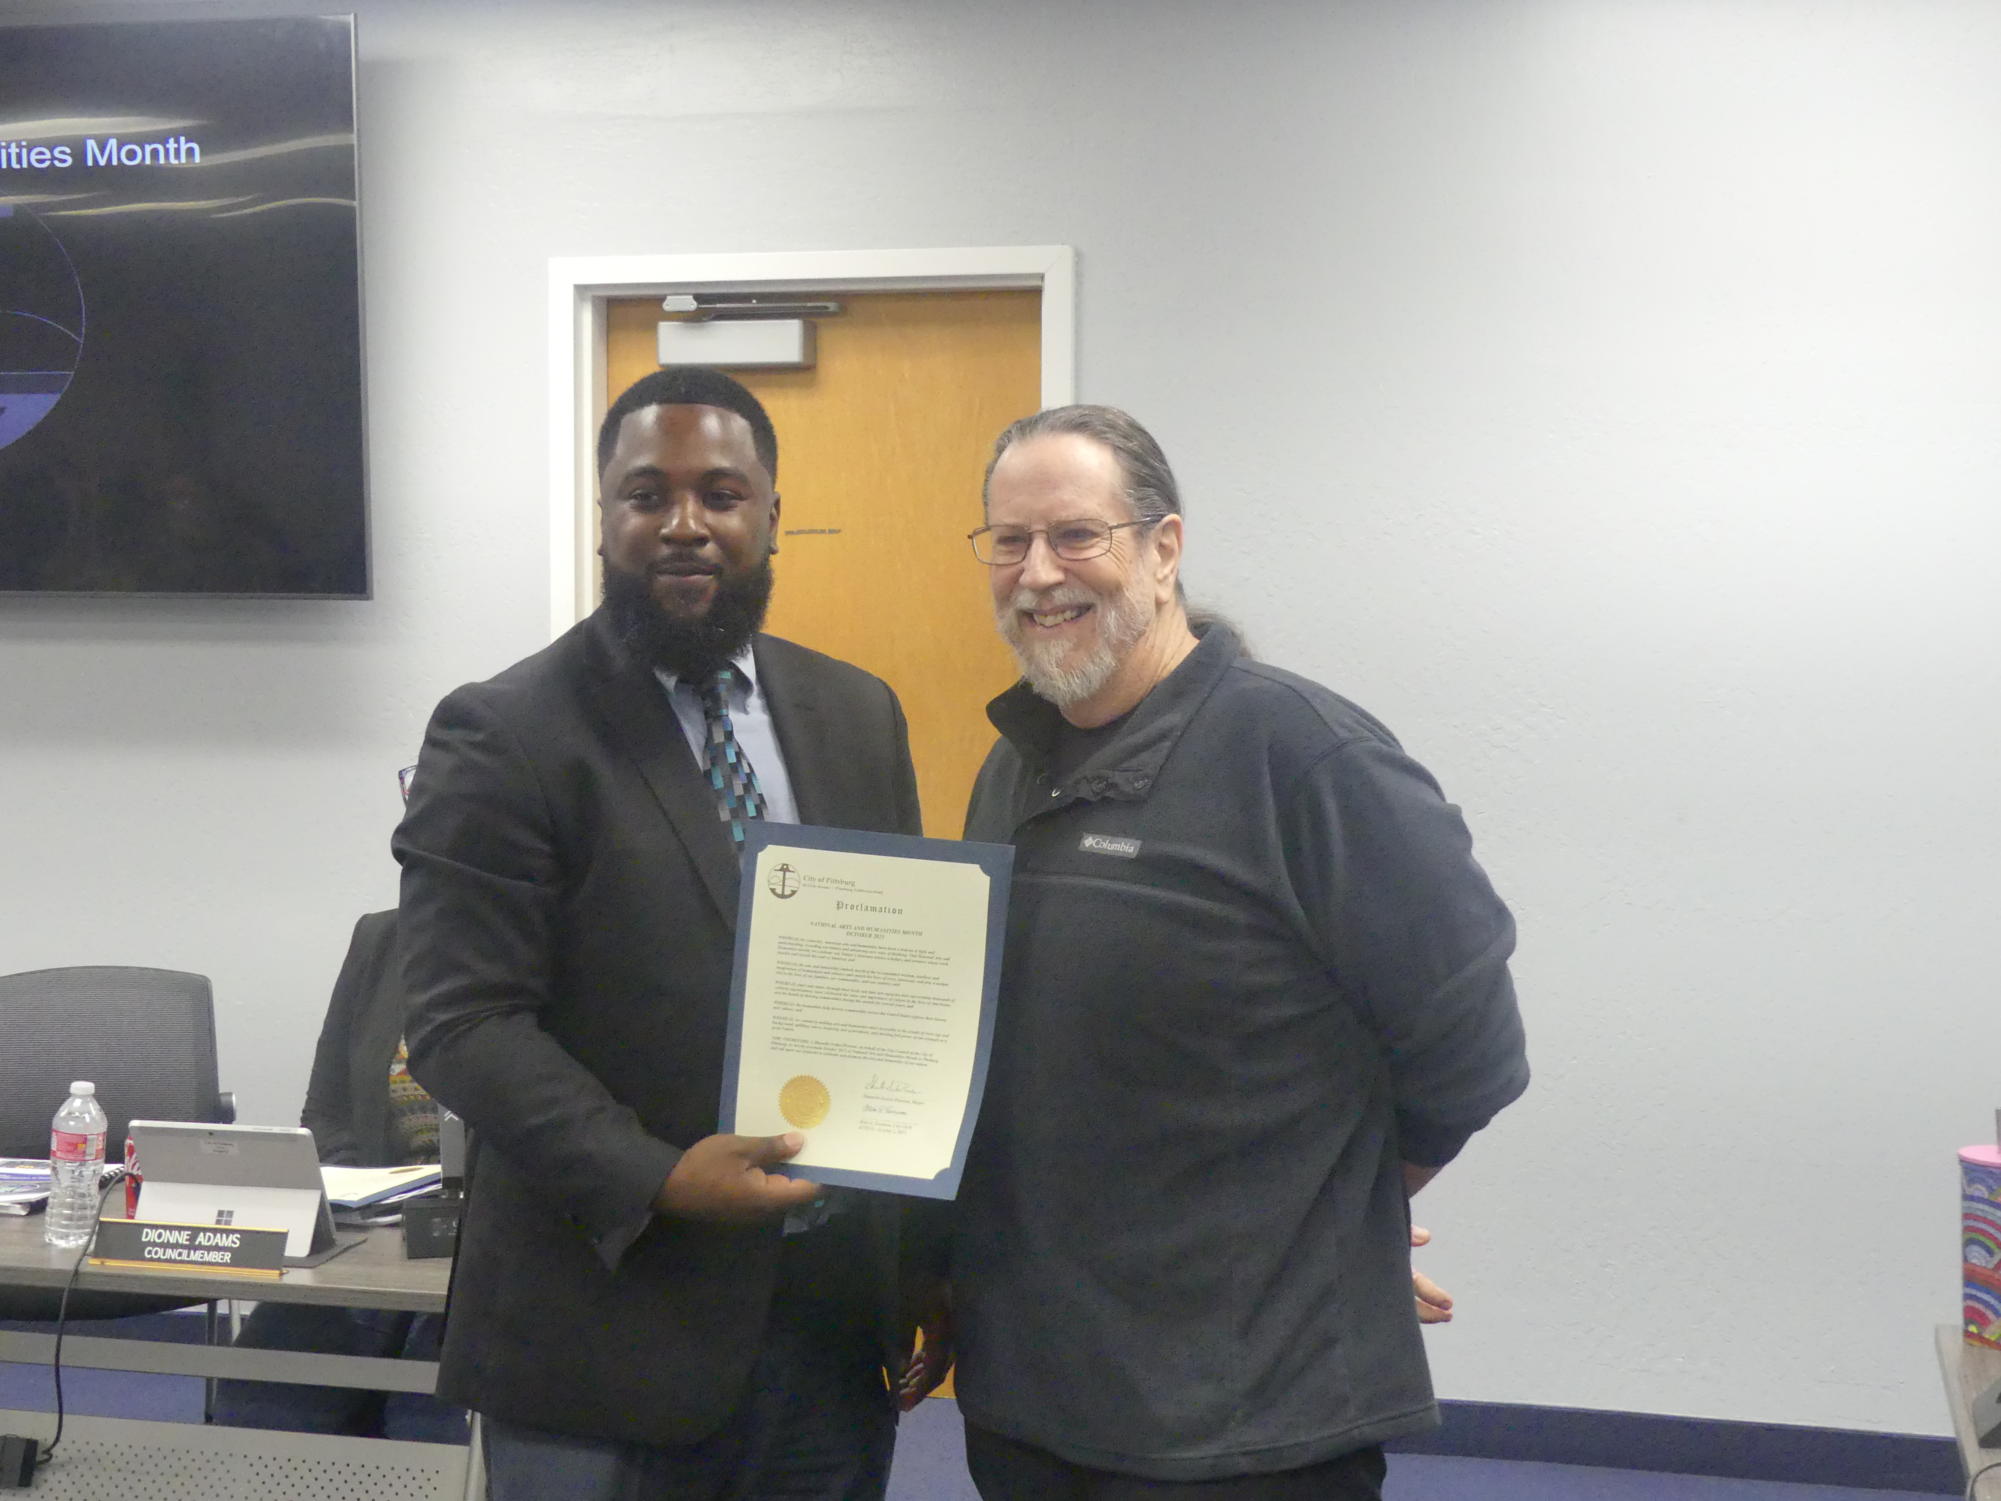 LMC Art Professor Ken Alexander posing for a photo as he is awarded a Proclamation for recognition of Arts and Humanities month by Pittsburg Councilmember Jelani Killings.